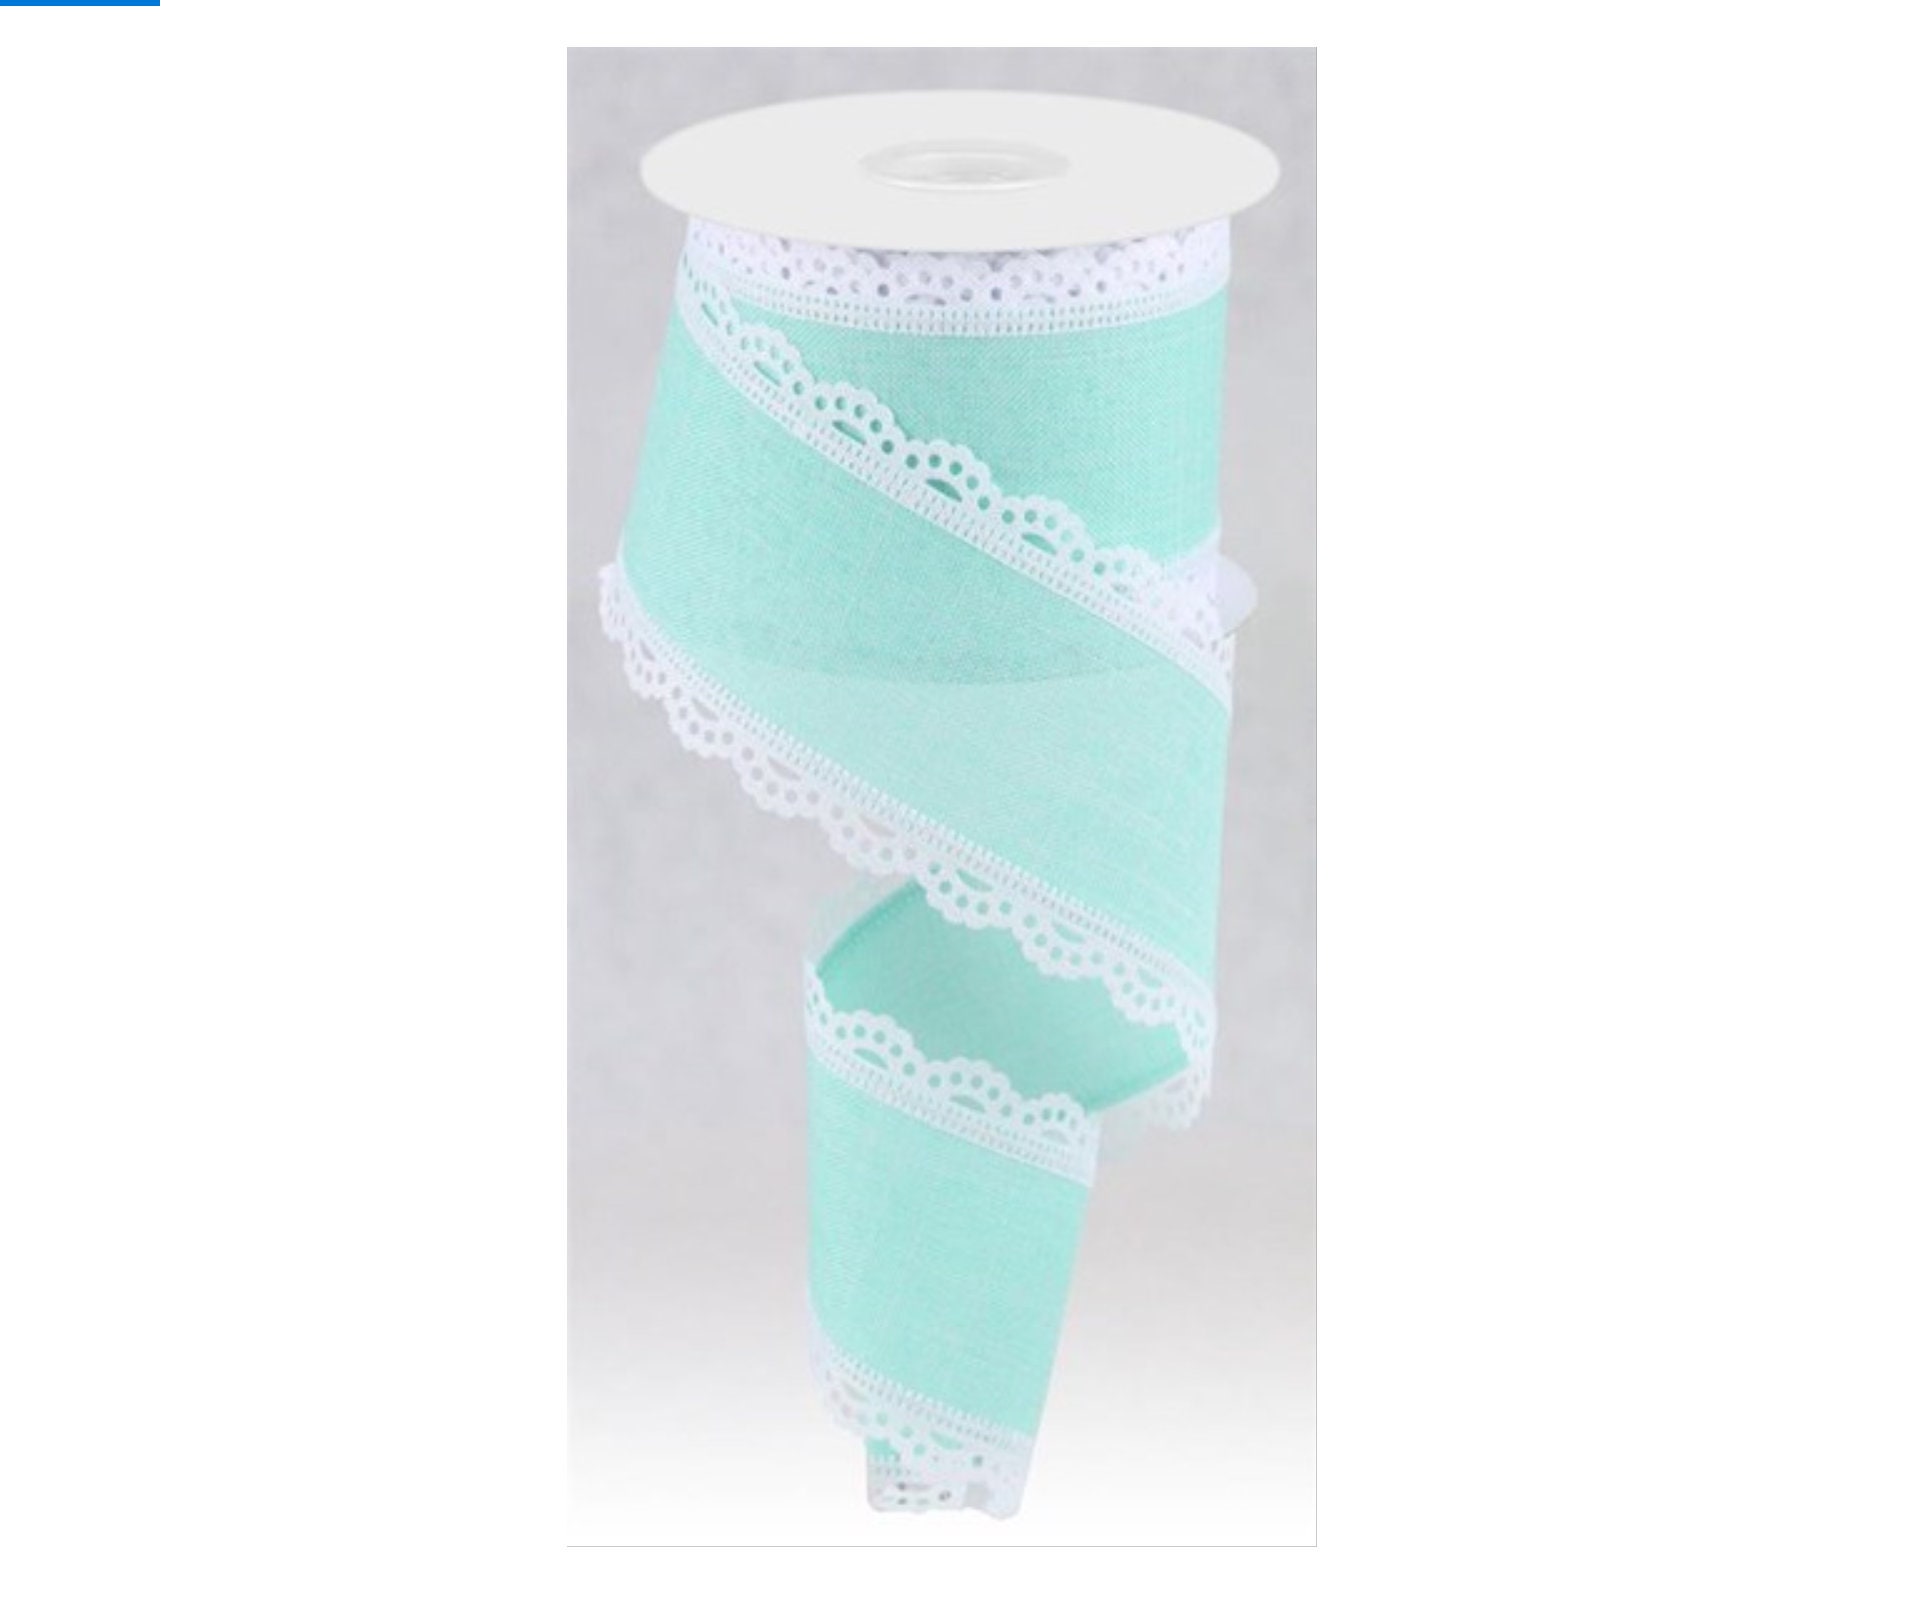 Mint Green Vintage Floral Ribbon with Scalloped Edge